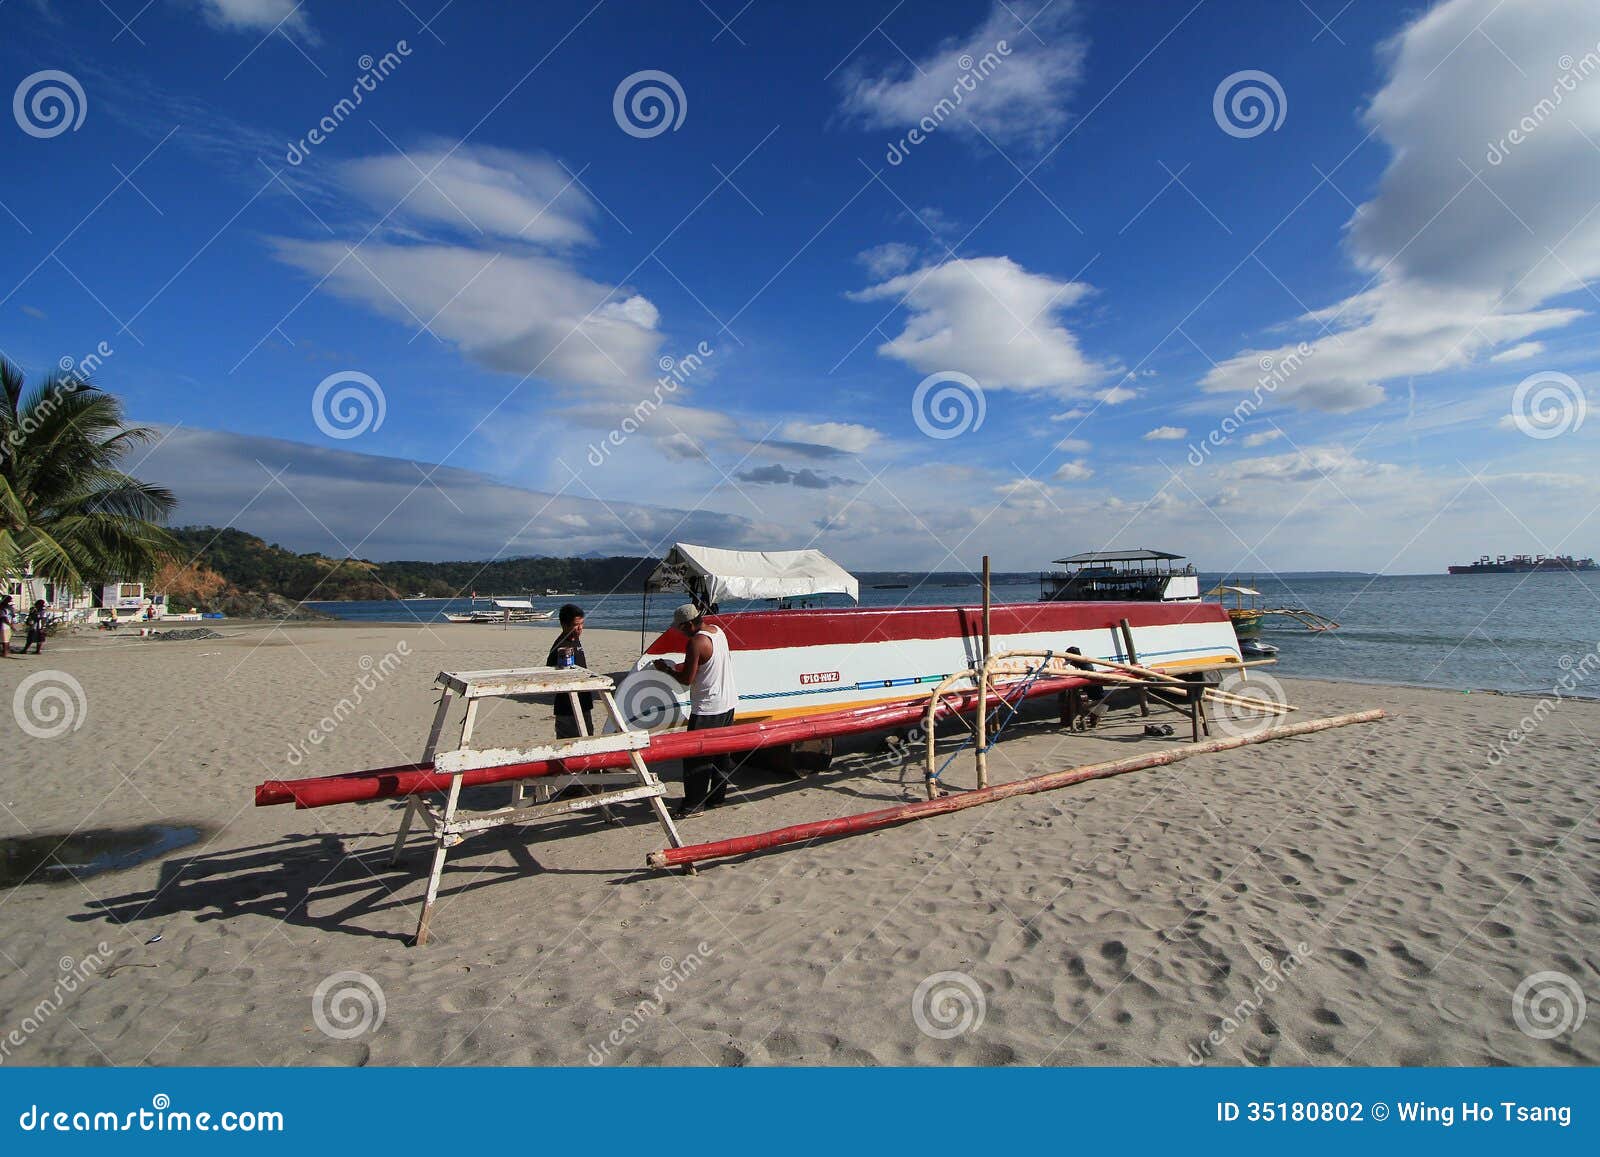 Philippines Fishing Boat In Subic Beach Editorial Photography - Image 